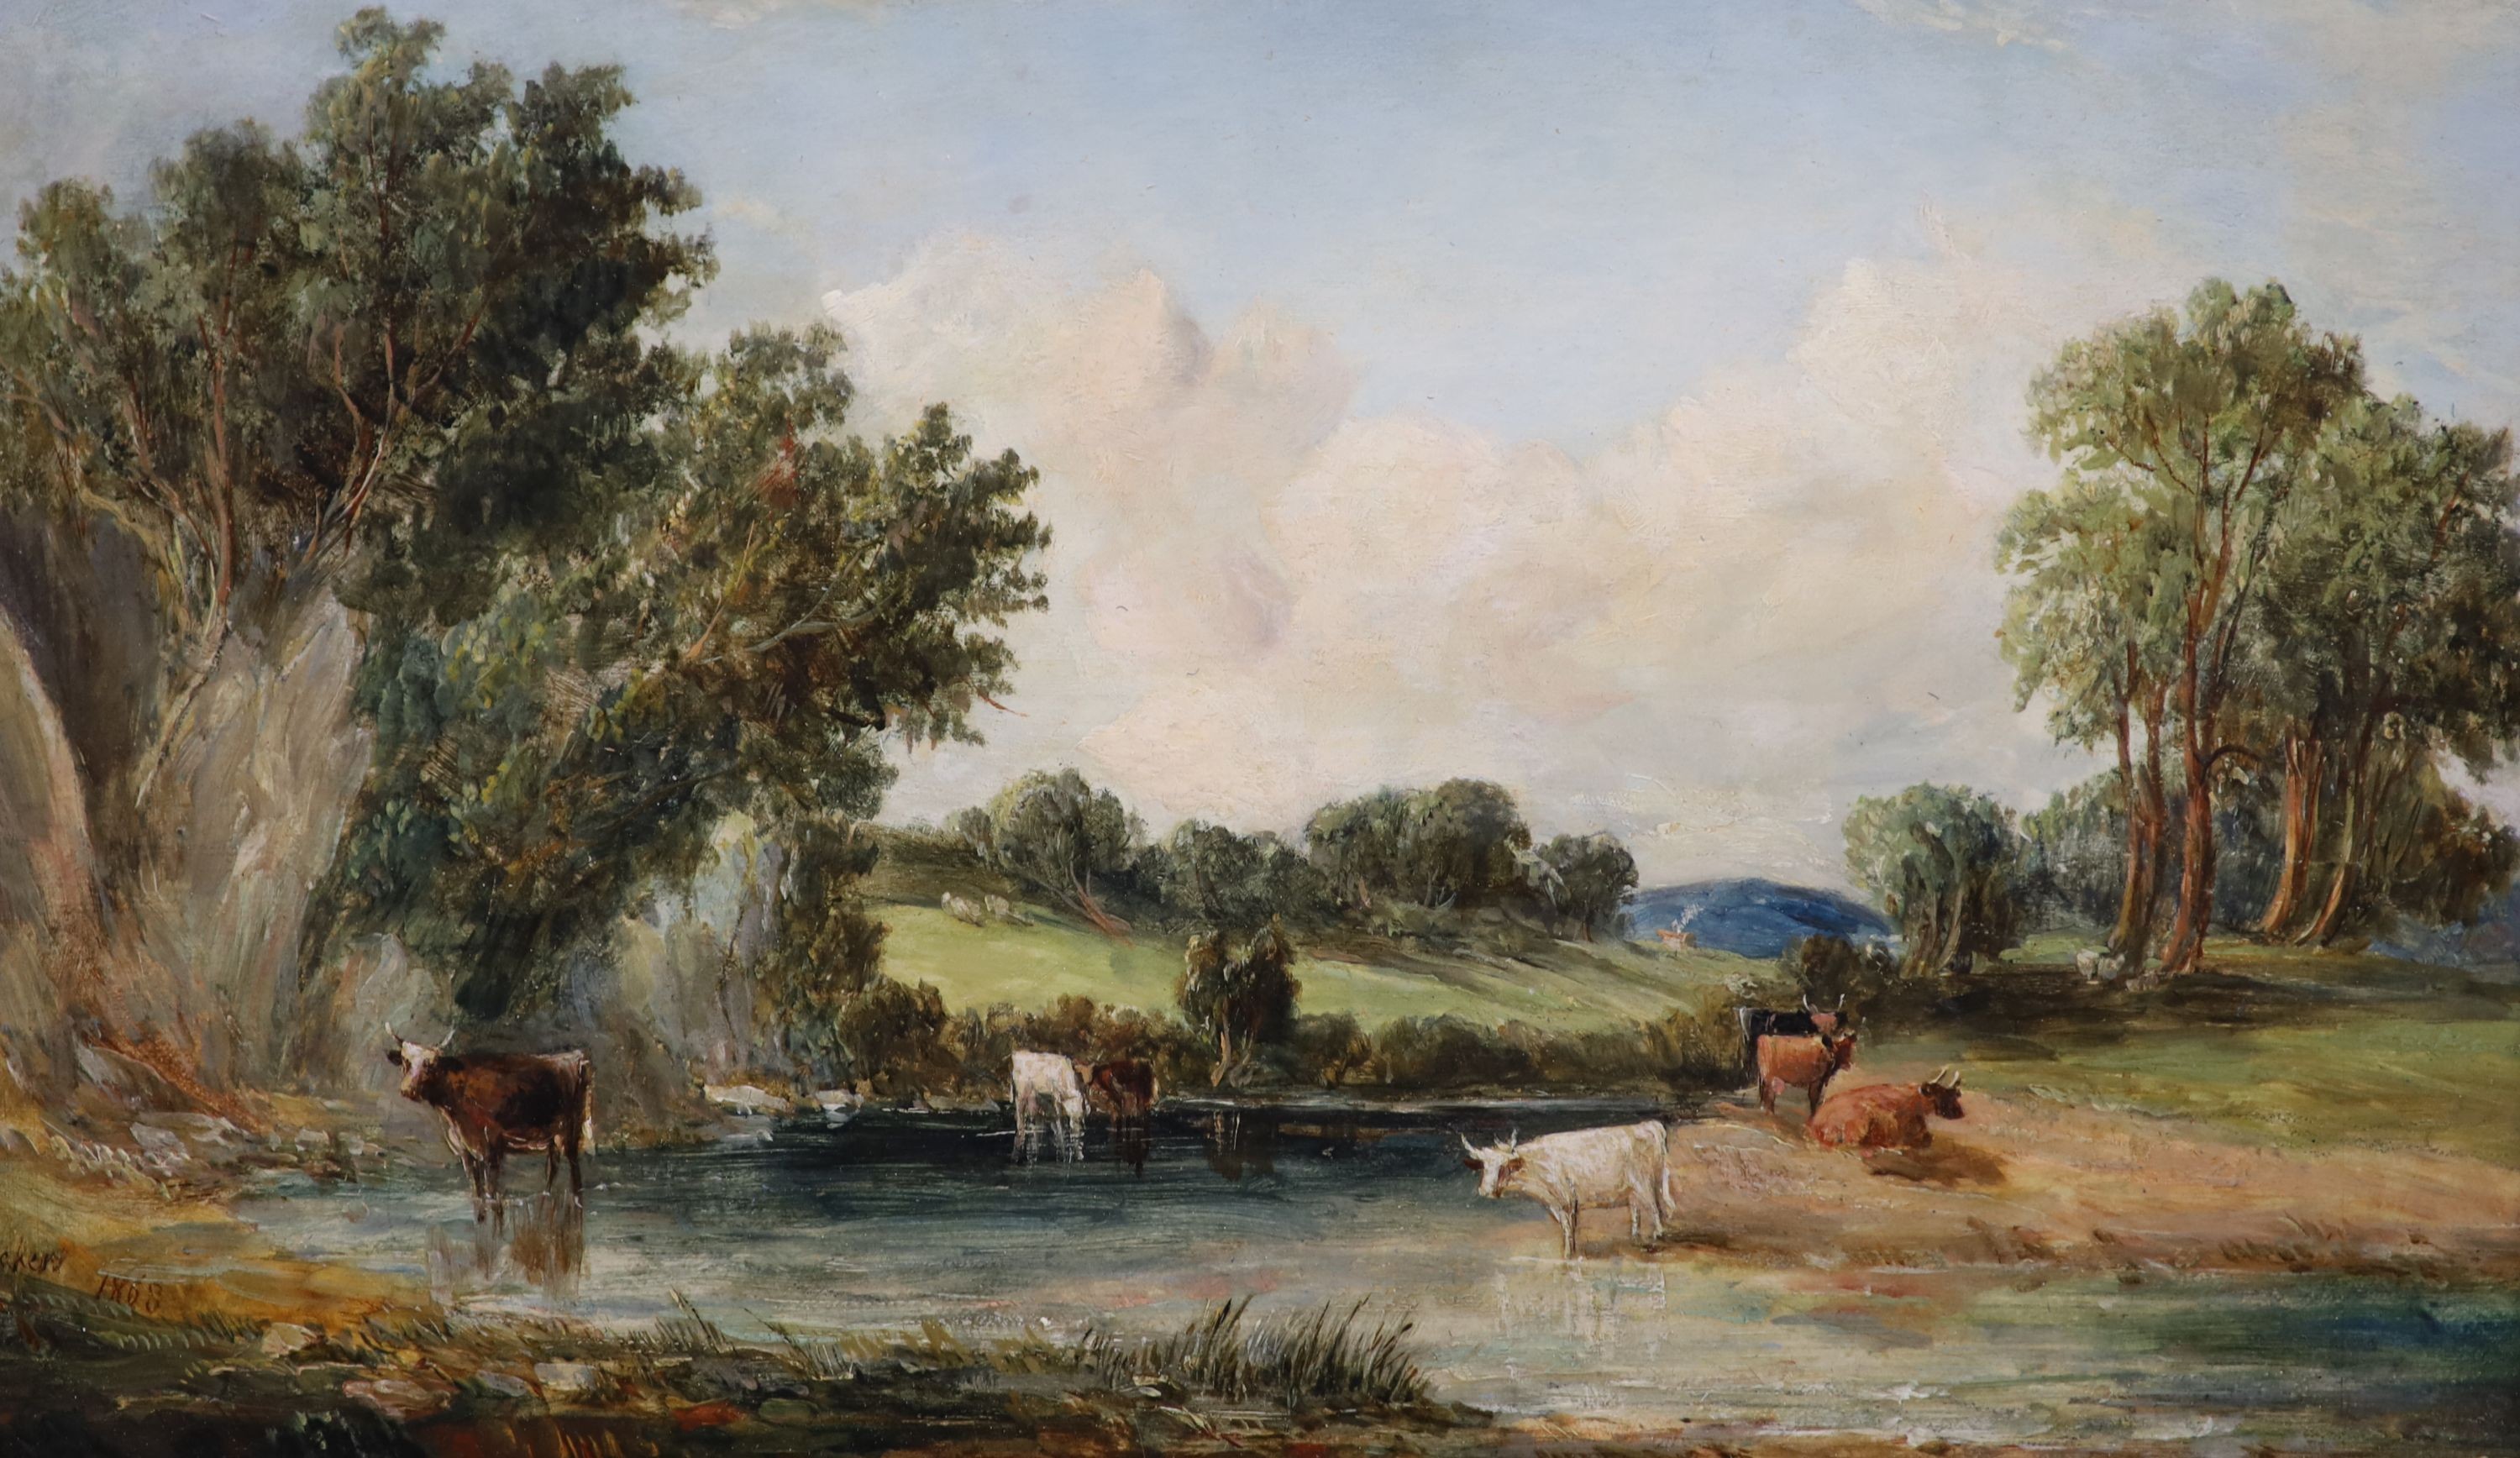 Alfred Vickers (1786-1868), Cattle watering in a landscape, oil on wooden panel, 21 x 34.5cm